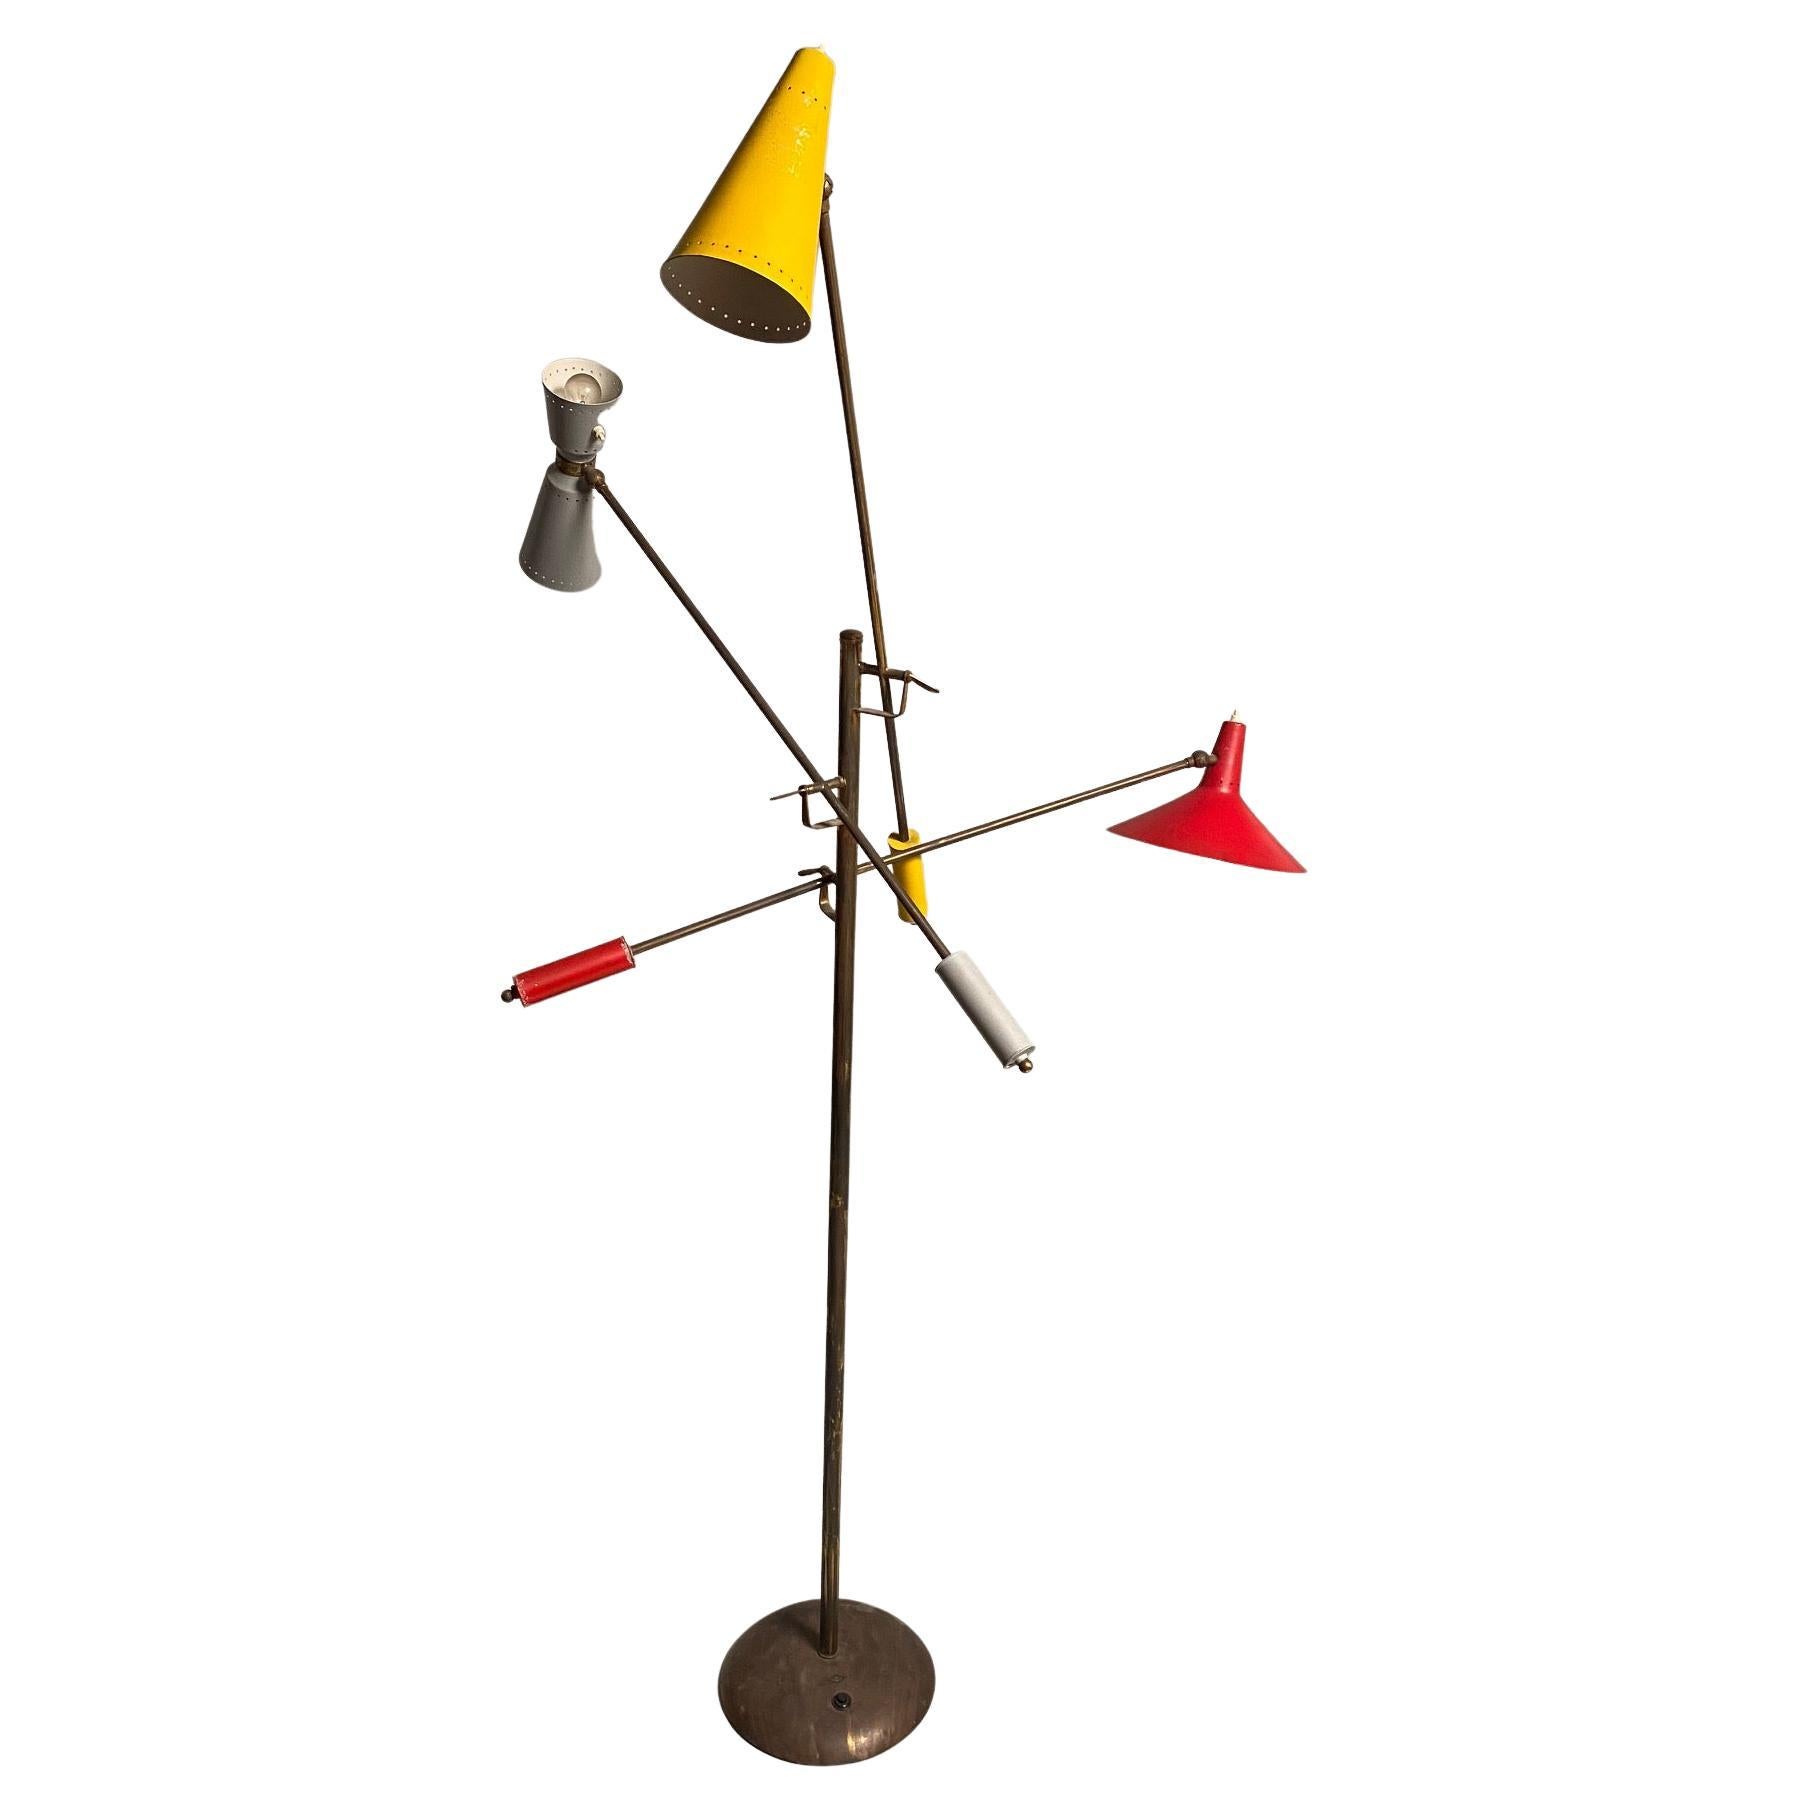 Rare and monumental Stilnovo floor lamp in brass, consisting of three adjustable arms. The lamp is placed in a context of experimental design typical of Mid-Century Italian design, very reminiscent of the famous Triennale lamp by Angelo Lelii, and